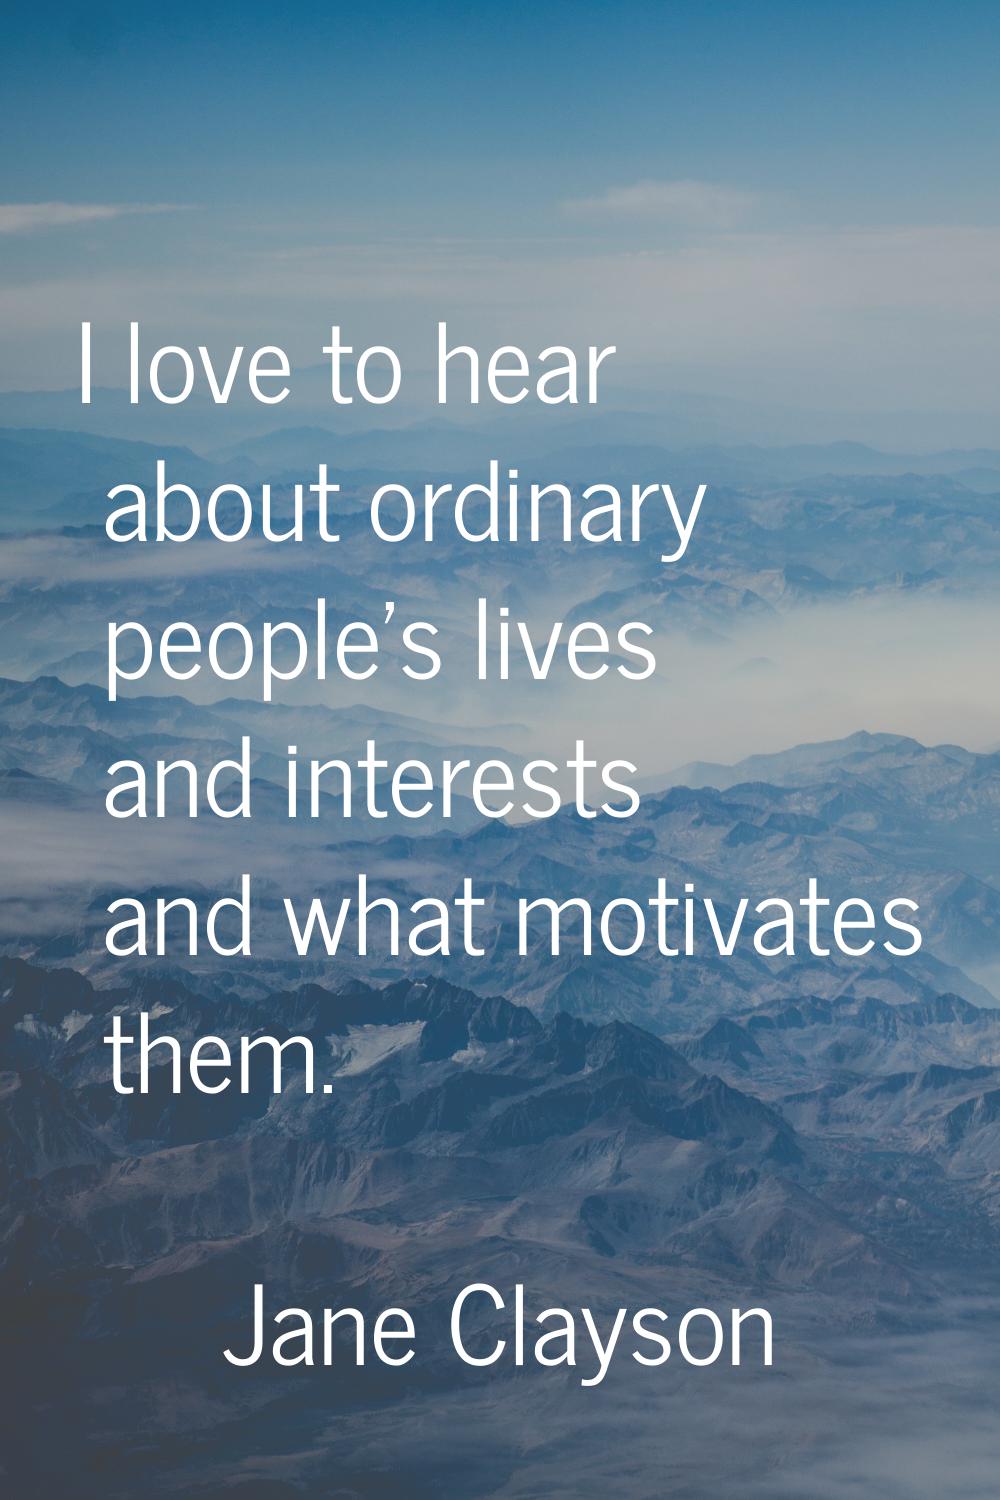 I love to hear about ordinary people's lives and interests and what motivates them.